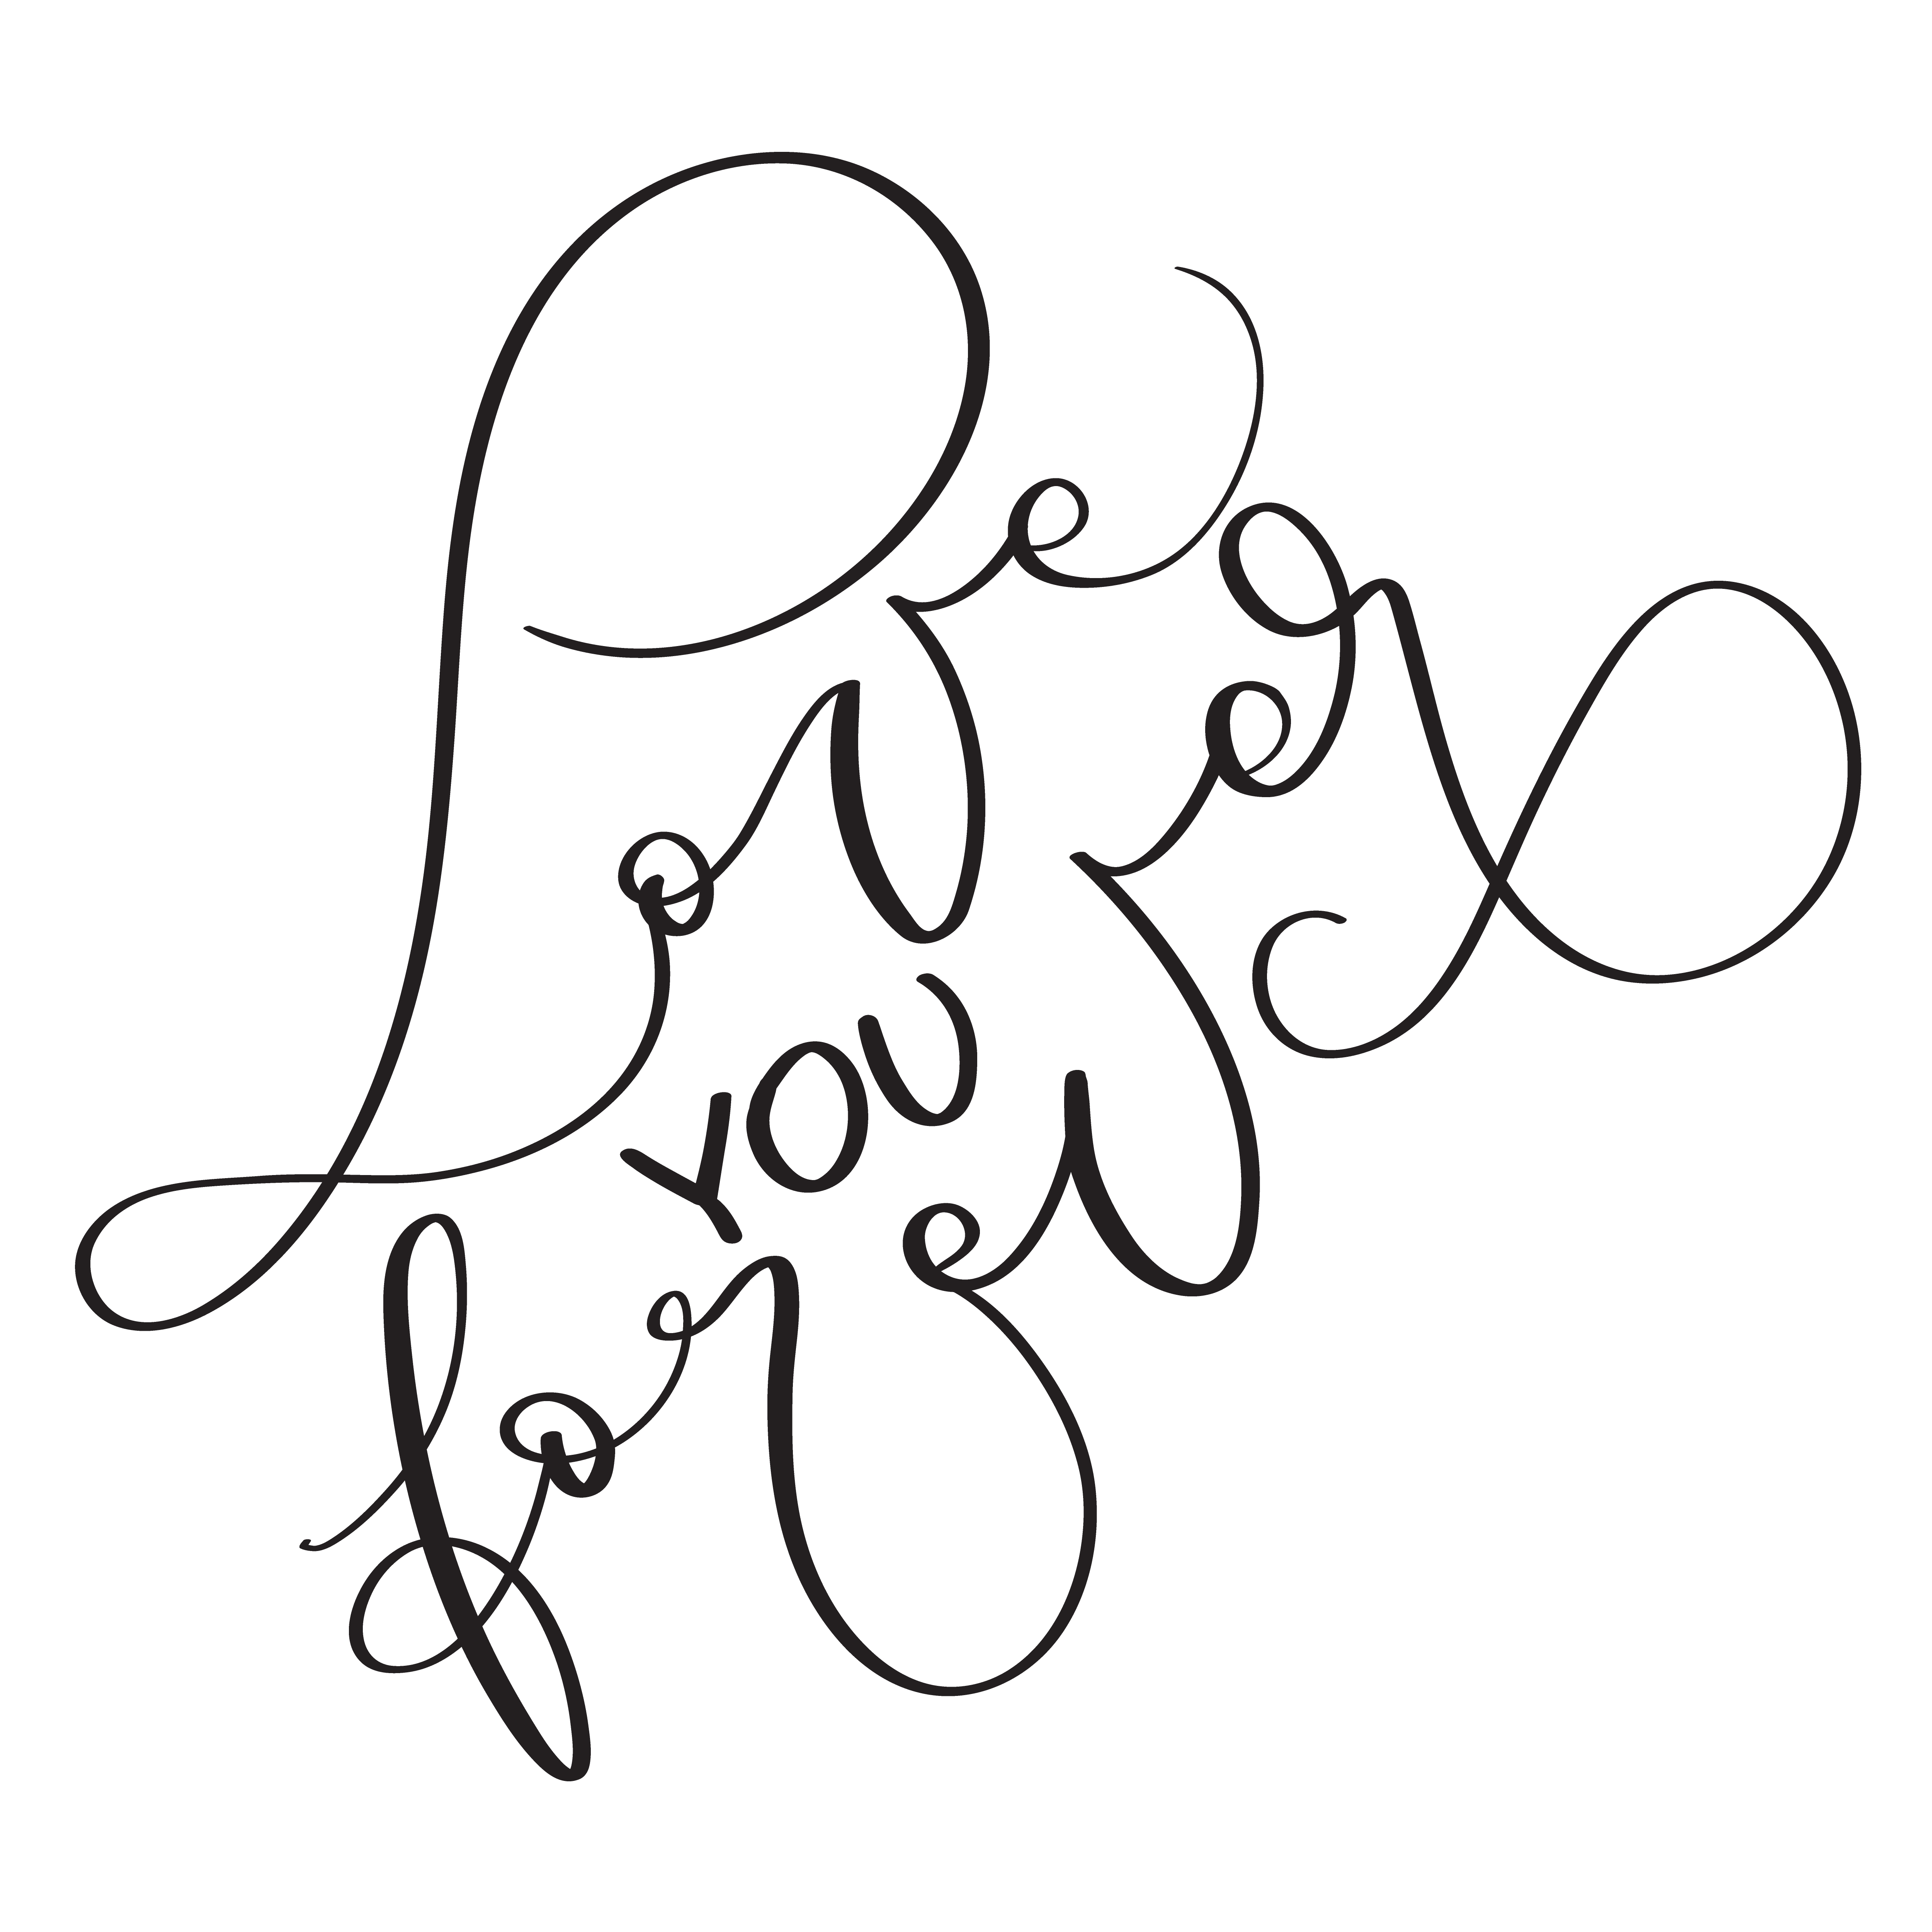 love you forever black and white hand written lettering about love